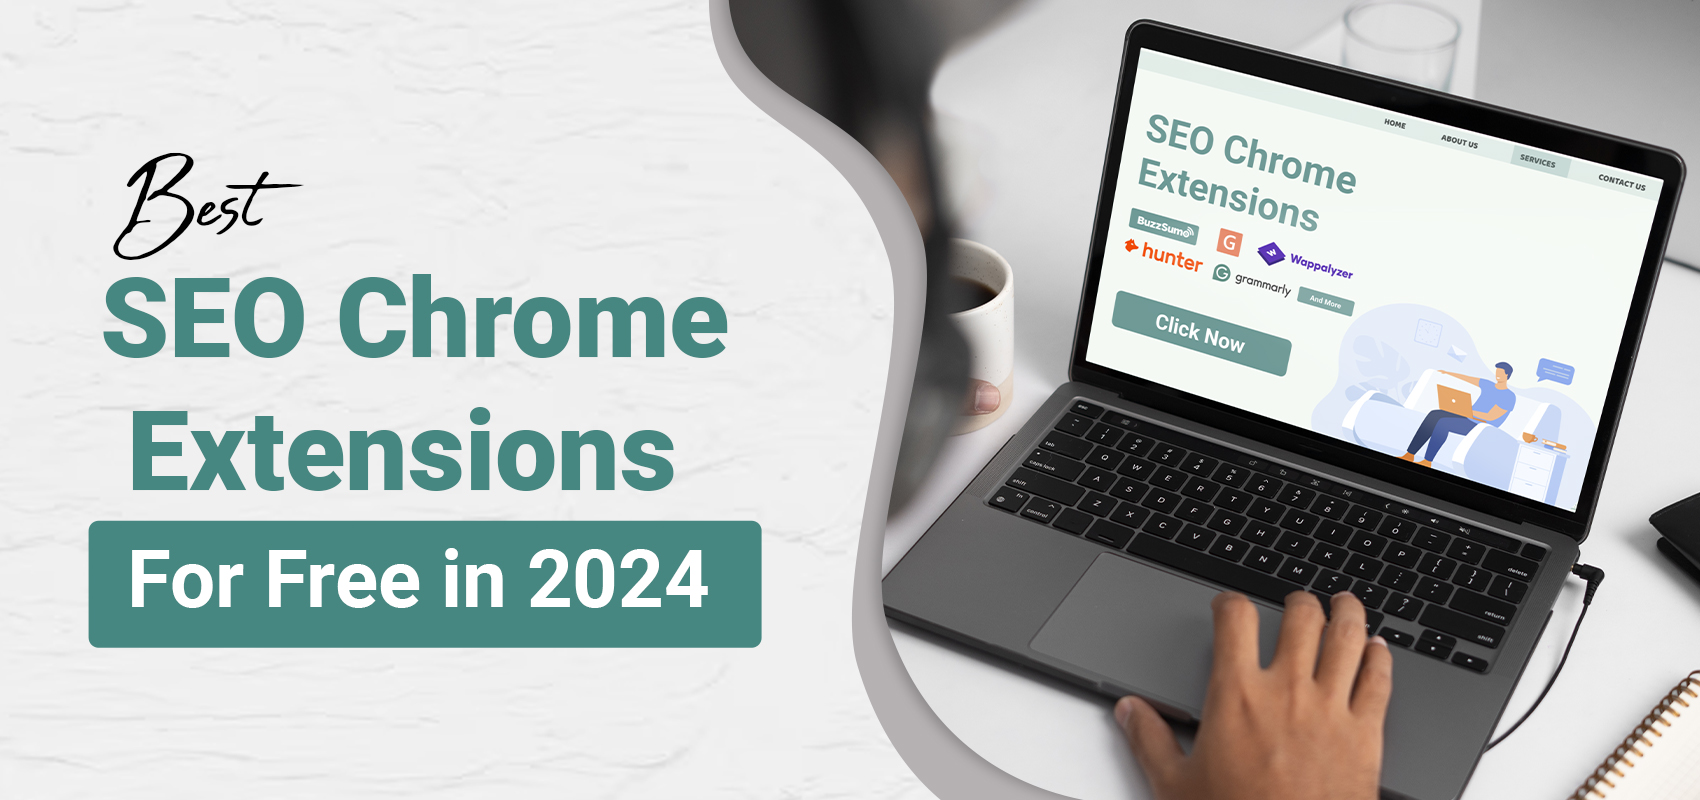 15 Best SEO Chrome Extension For Free To Use In 2024